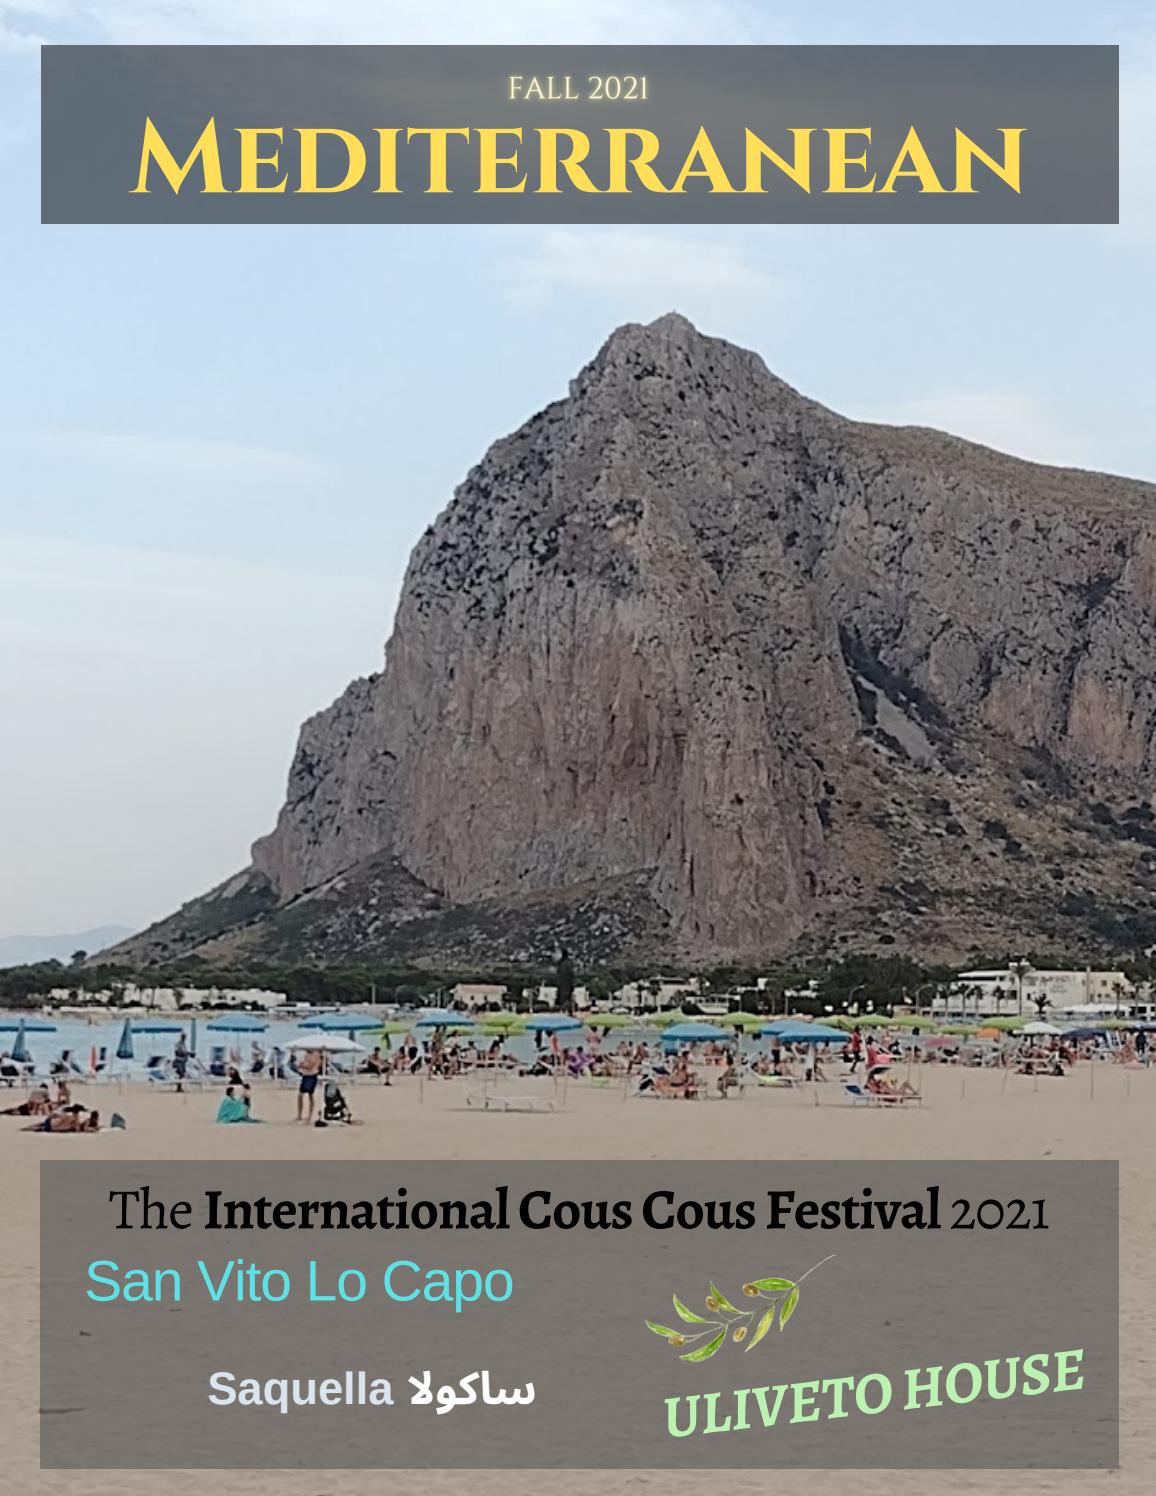 Mediterranean Magazine Fall 2021 Issue - In this issue: Uliveto House, Cous Cous Fest 2021 & UNICO